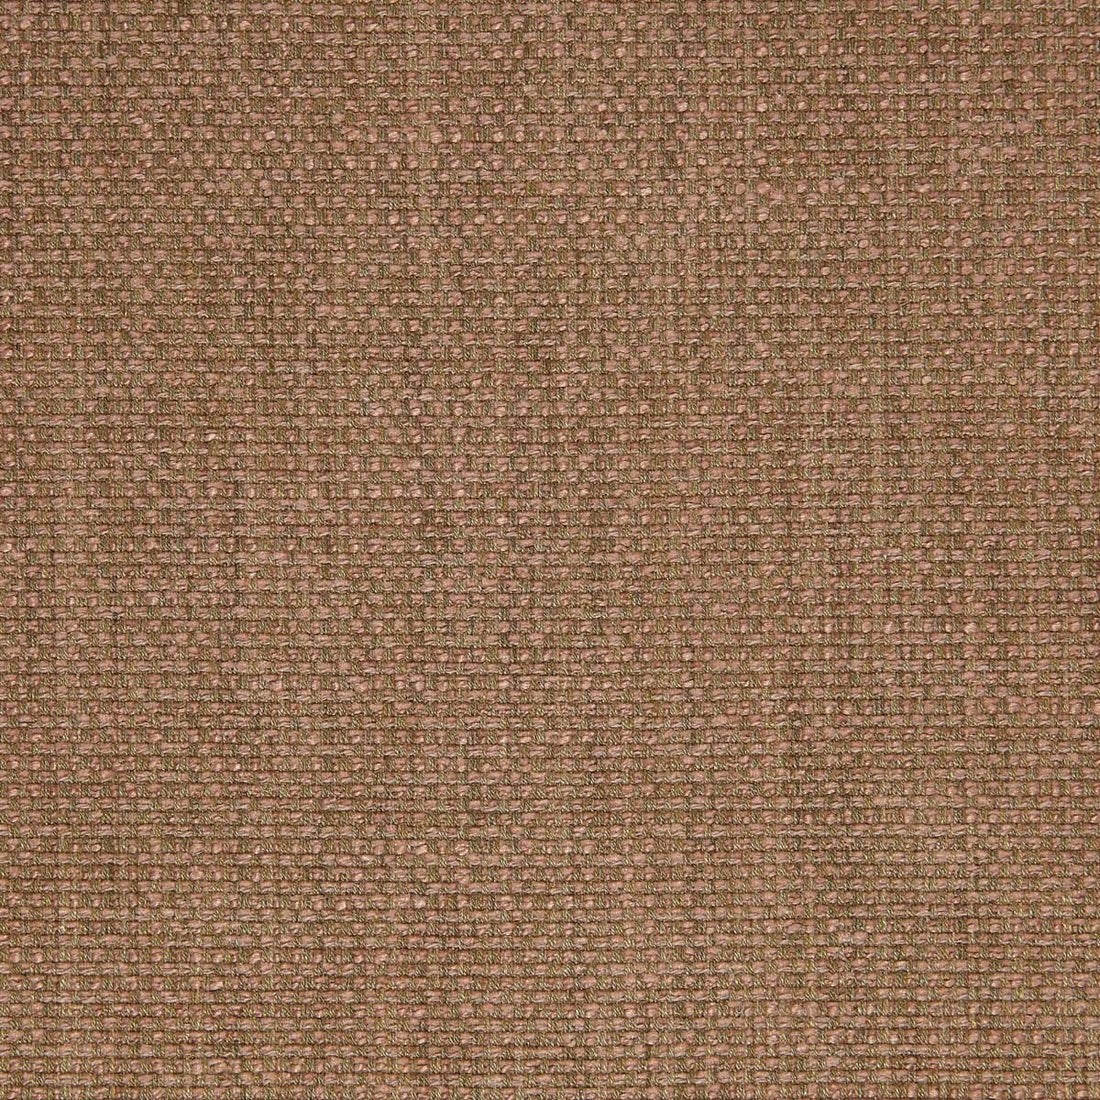 Godai fabric in 12 color - pattern LZ-30349.12.0 - by Kravet Design in the Lizzo collection